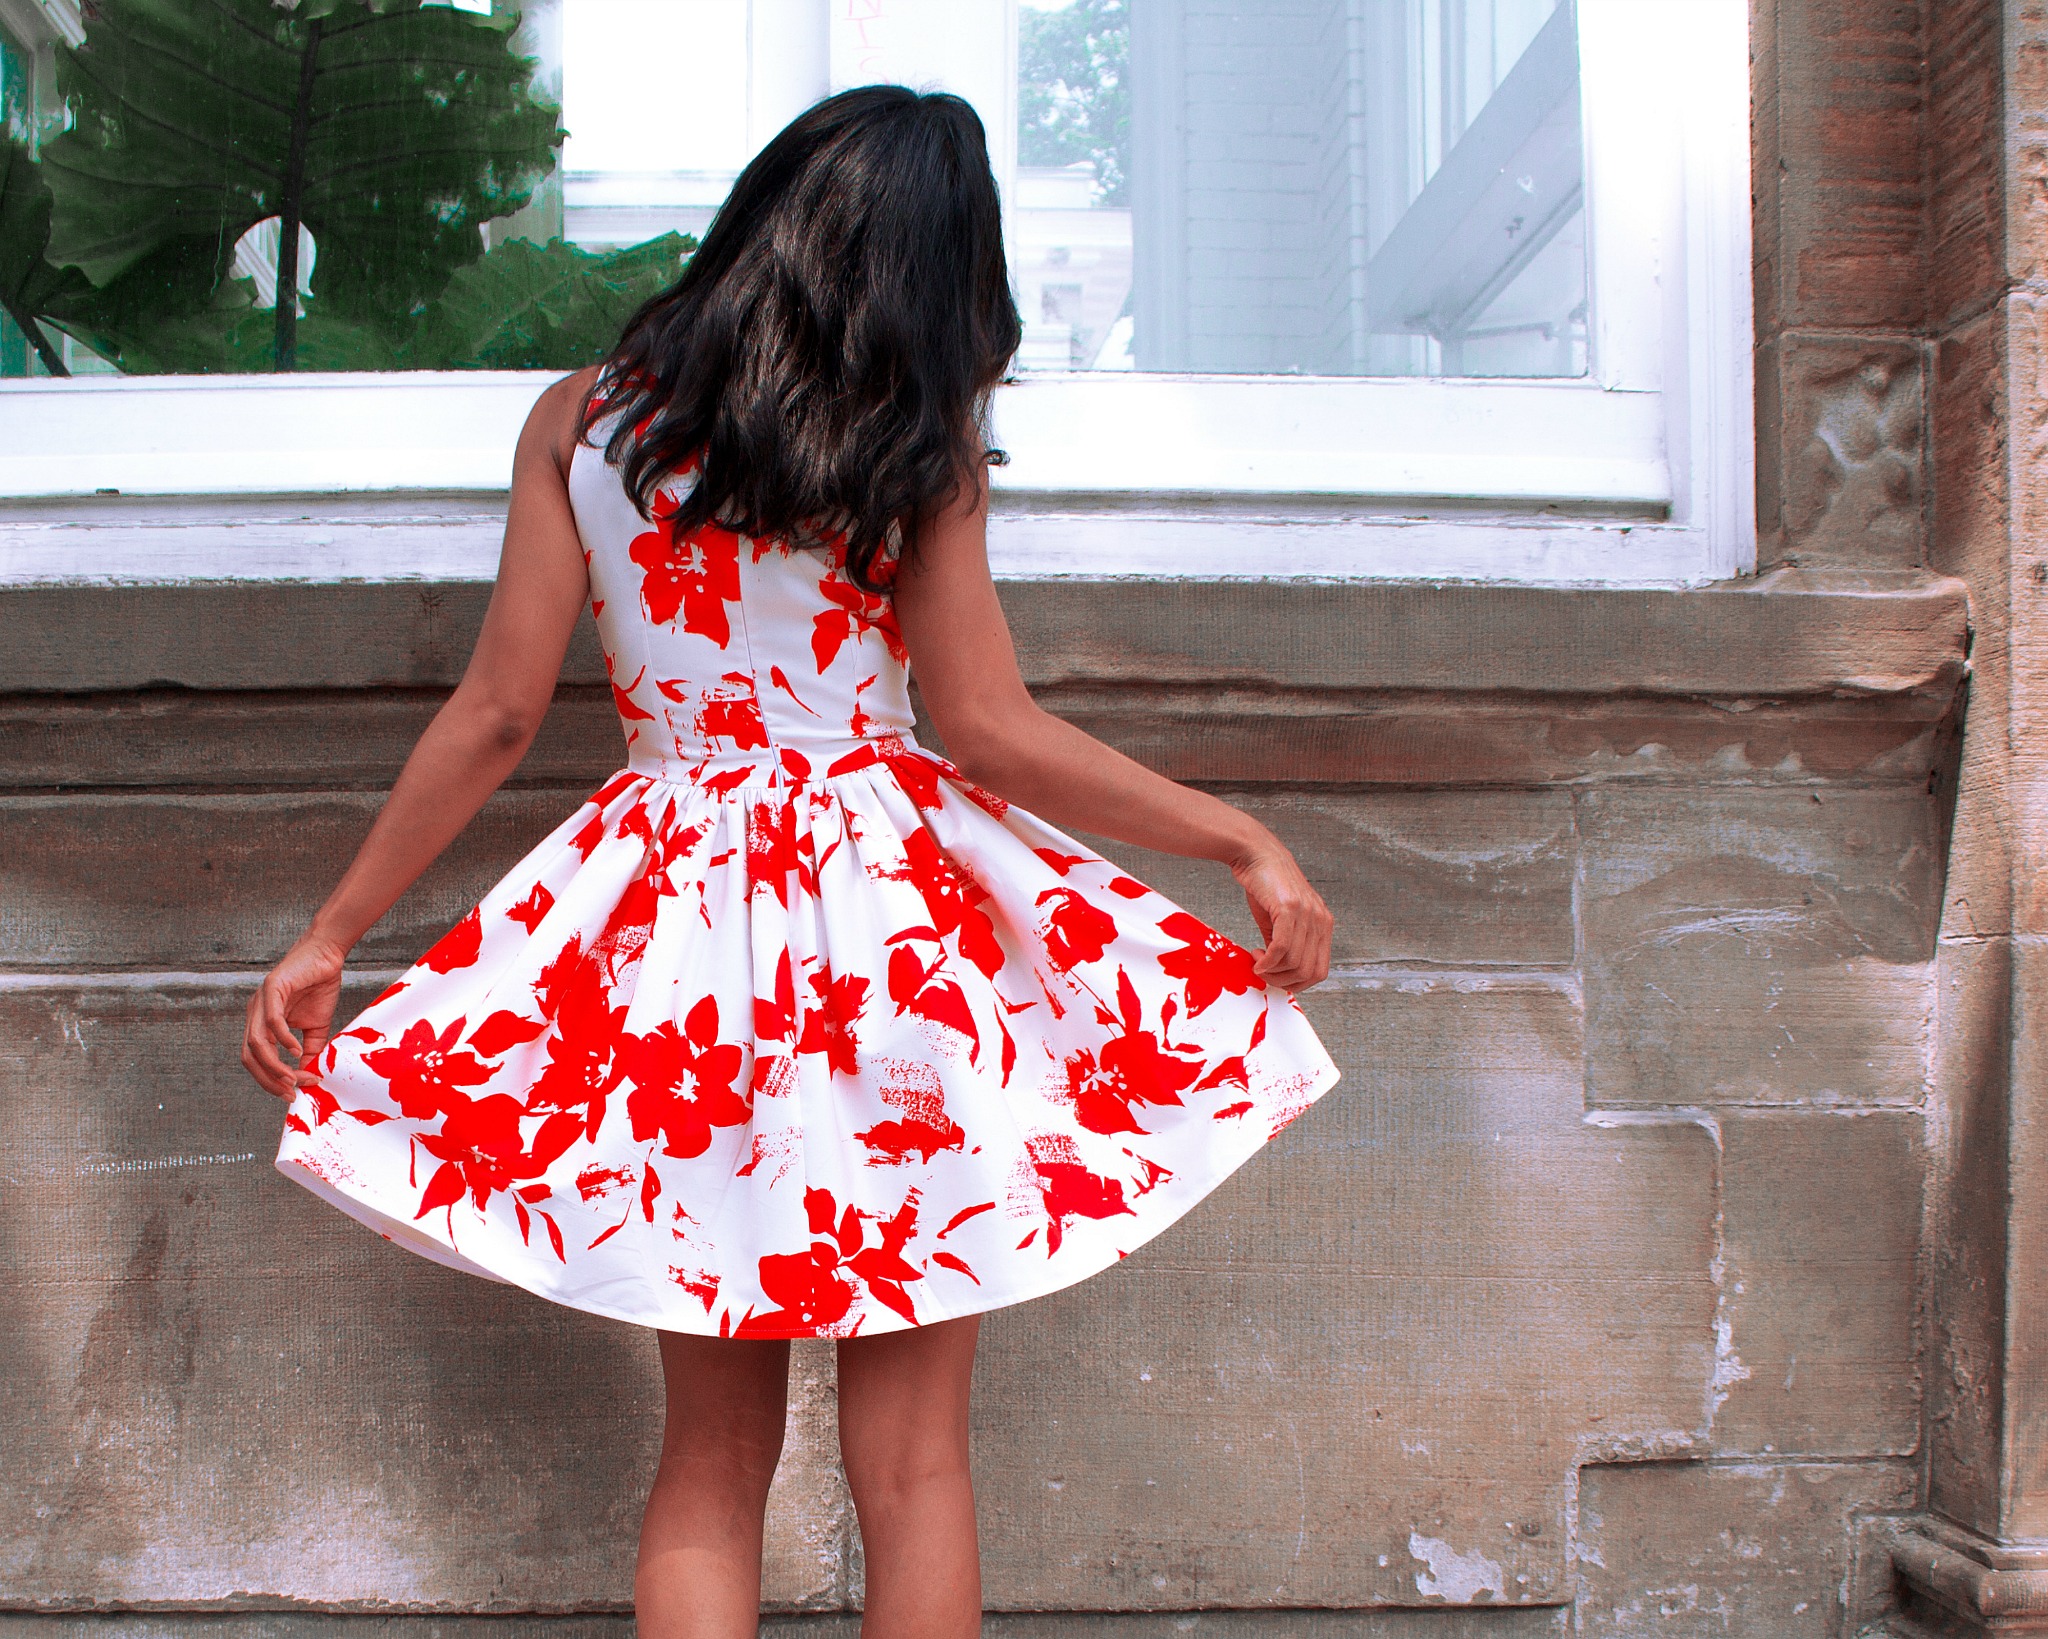 DIY coral & white cotton sateen summer dress with gathers. See more here: http://bit.ly/2w4o7EQ